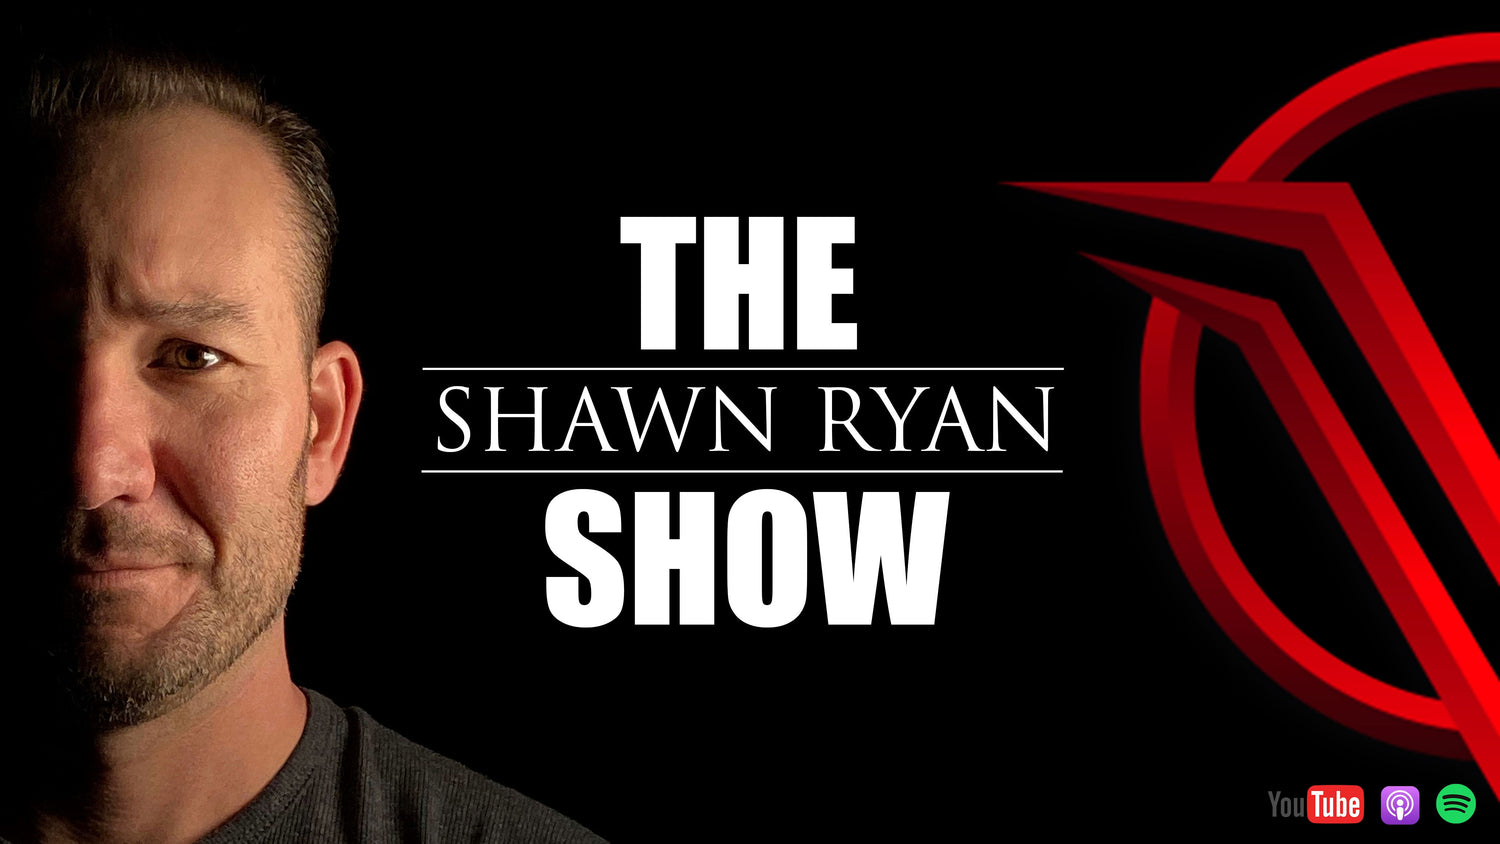 The Shawn Ryan Show Cover: click to watch and listen to shows